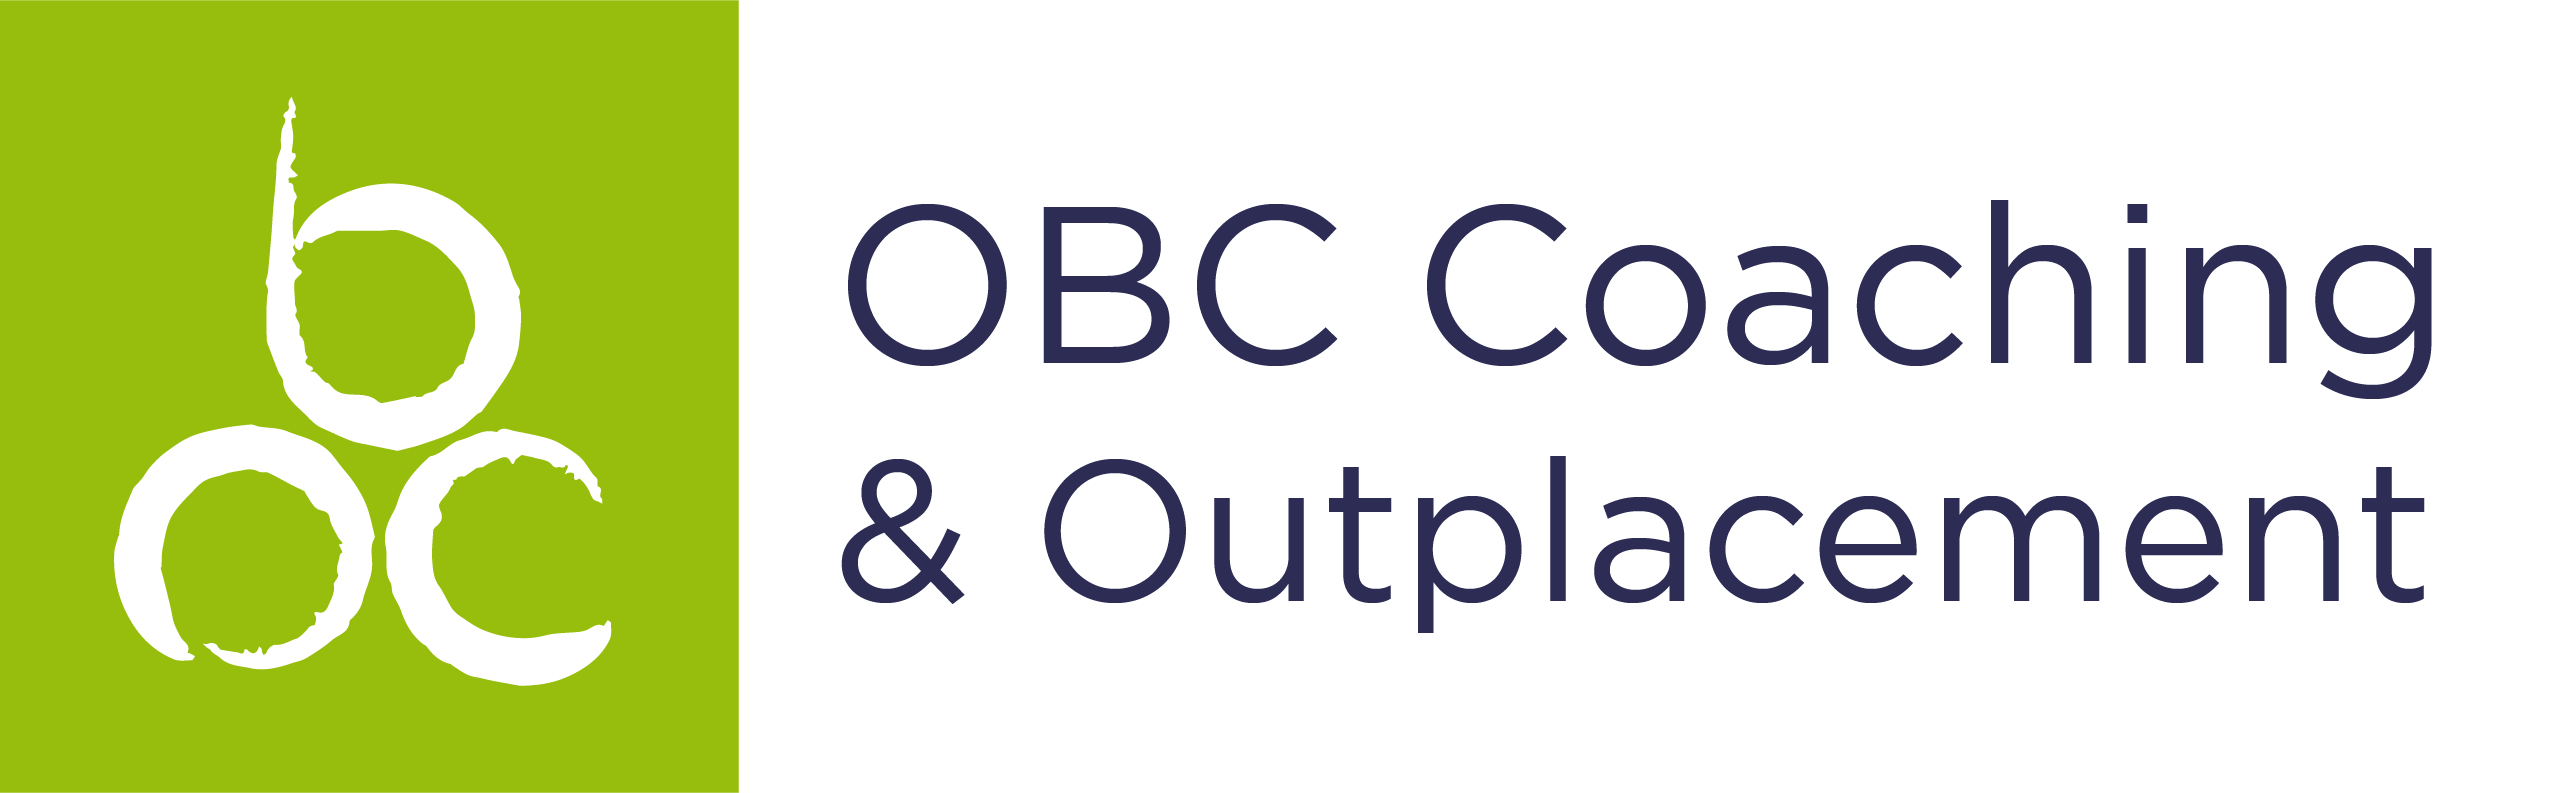 OBC Coaching & Outplacement